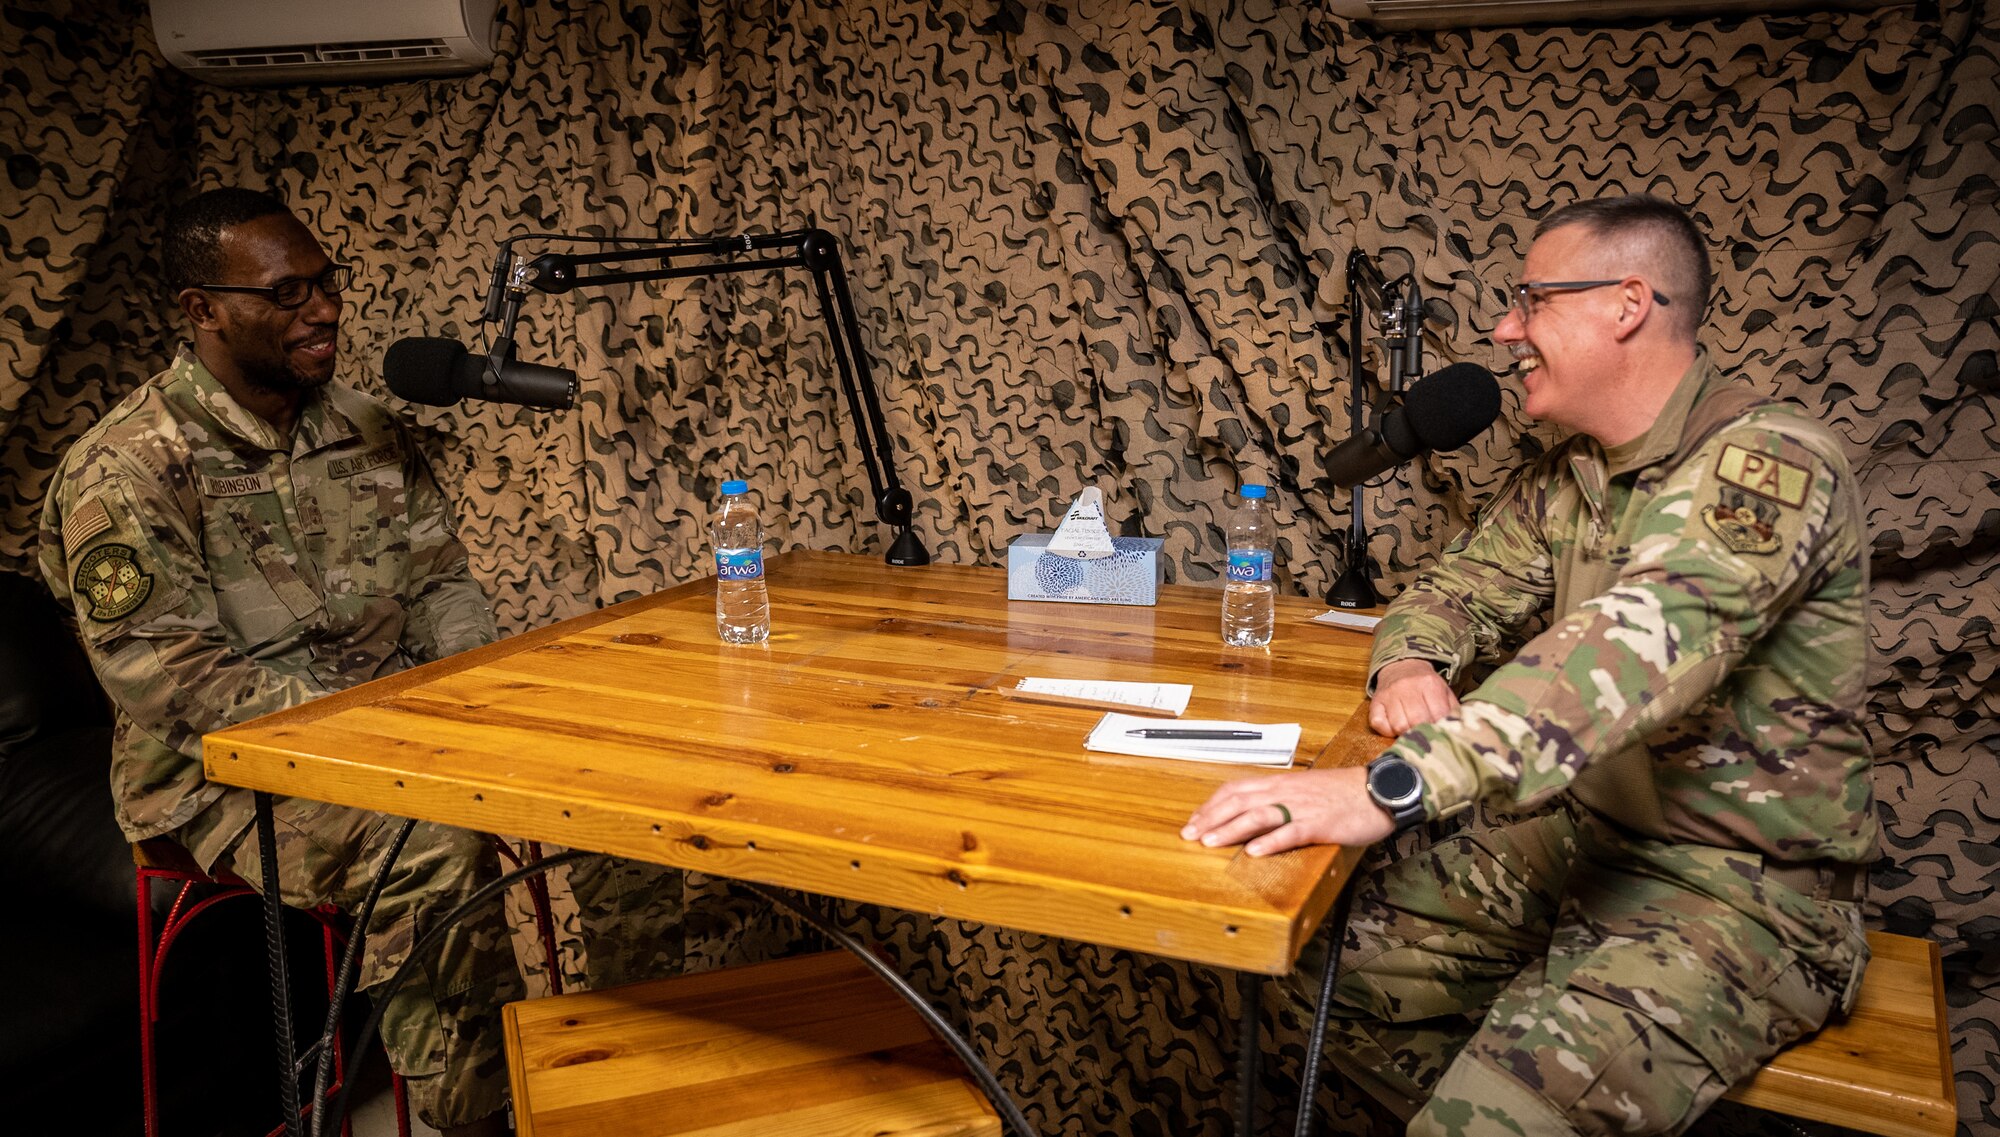 Master Sgt. Teko Robinson, 55th Expeditionary Fighter Generation Squadron production superintendent, laughs with Master Sgt. Christopher Parr, 332d Air Expeditionary Wing public affairs specialist, while recording a 332d AEW Spit Fire Podcast in Southwest Asia, Jan. 31, 2022. Robinson shared what Black History Month means for him and, as the lead planner for Black History Month activities, a schedule of events for the month of February. (U.S. Air Force photo by Master Sgt. Christopher Parr)